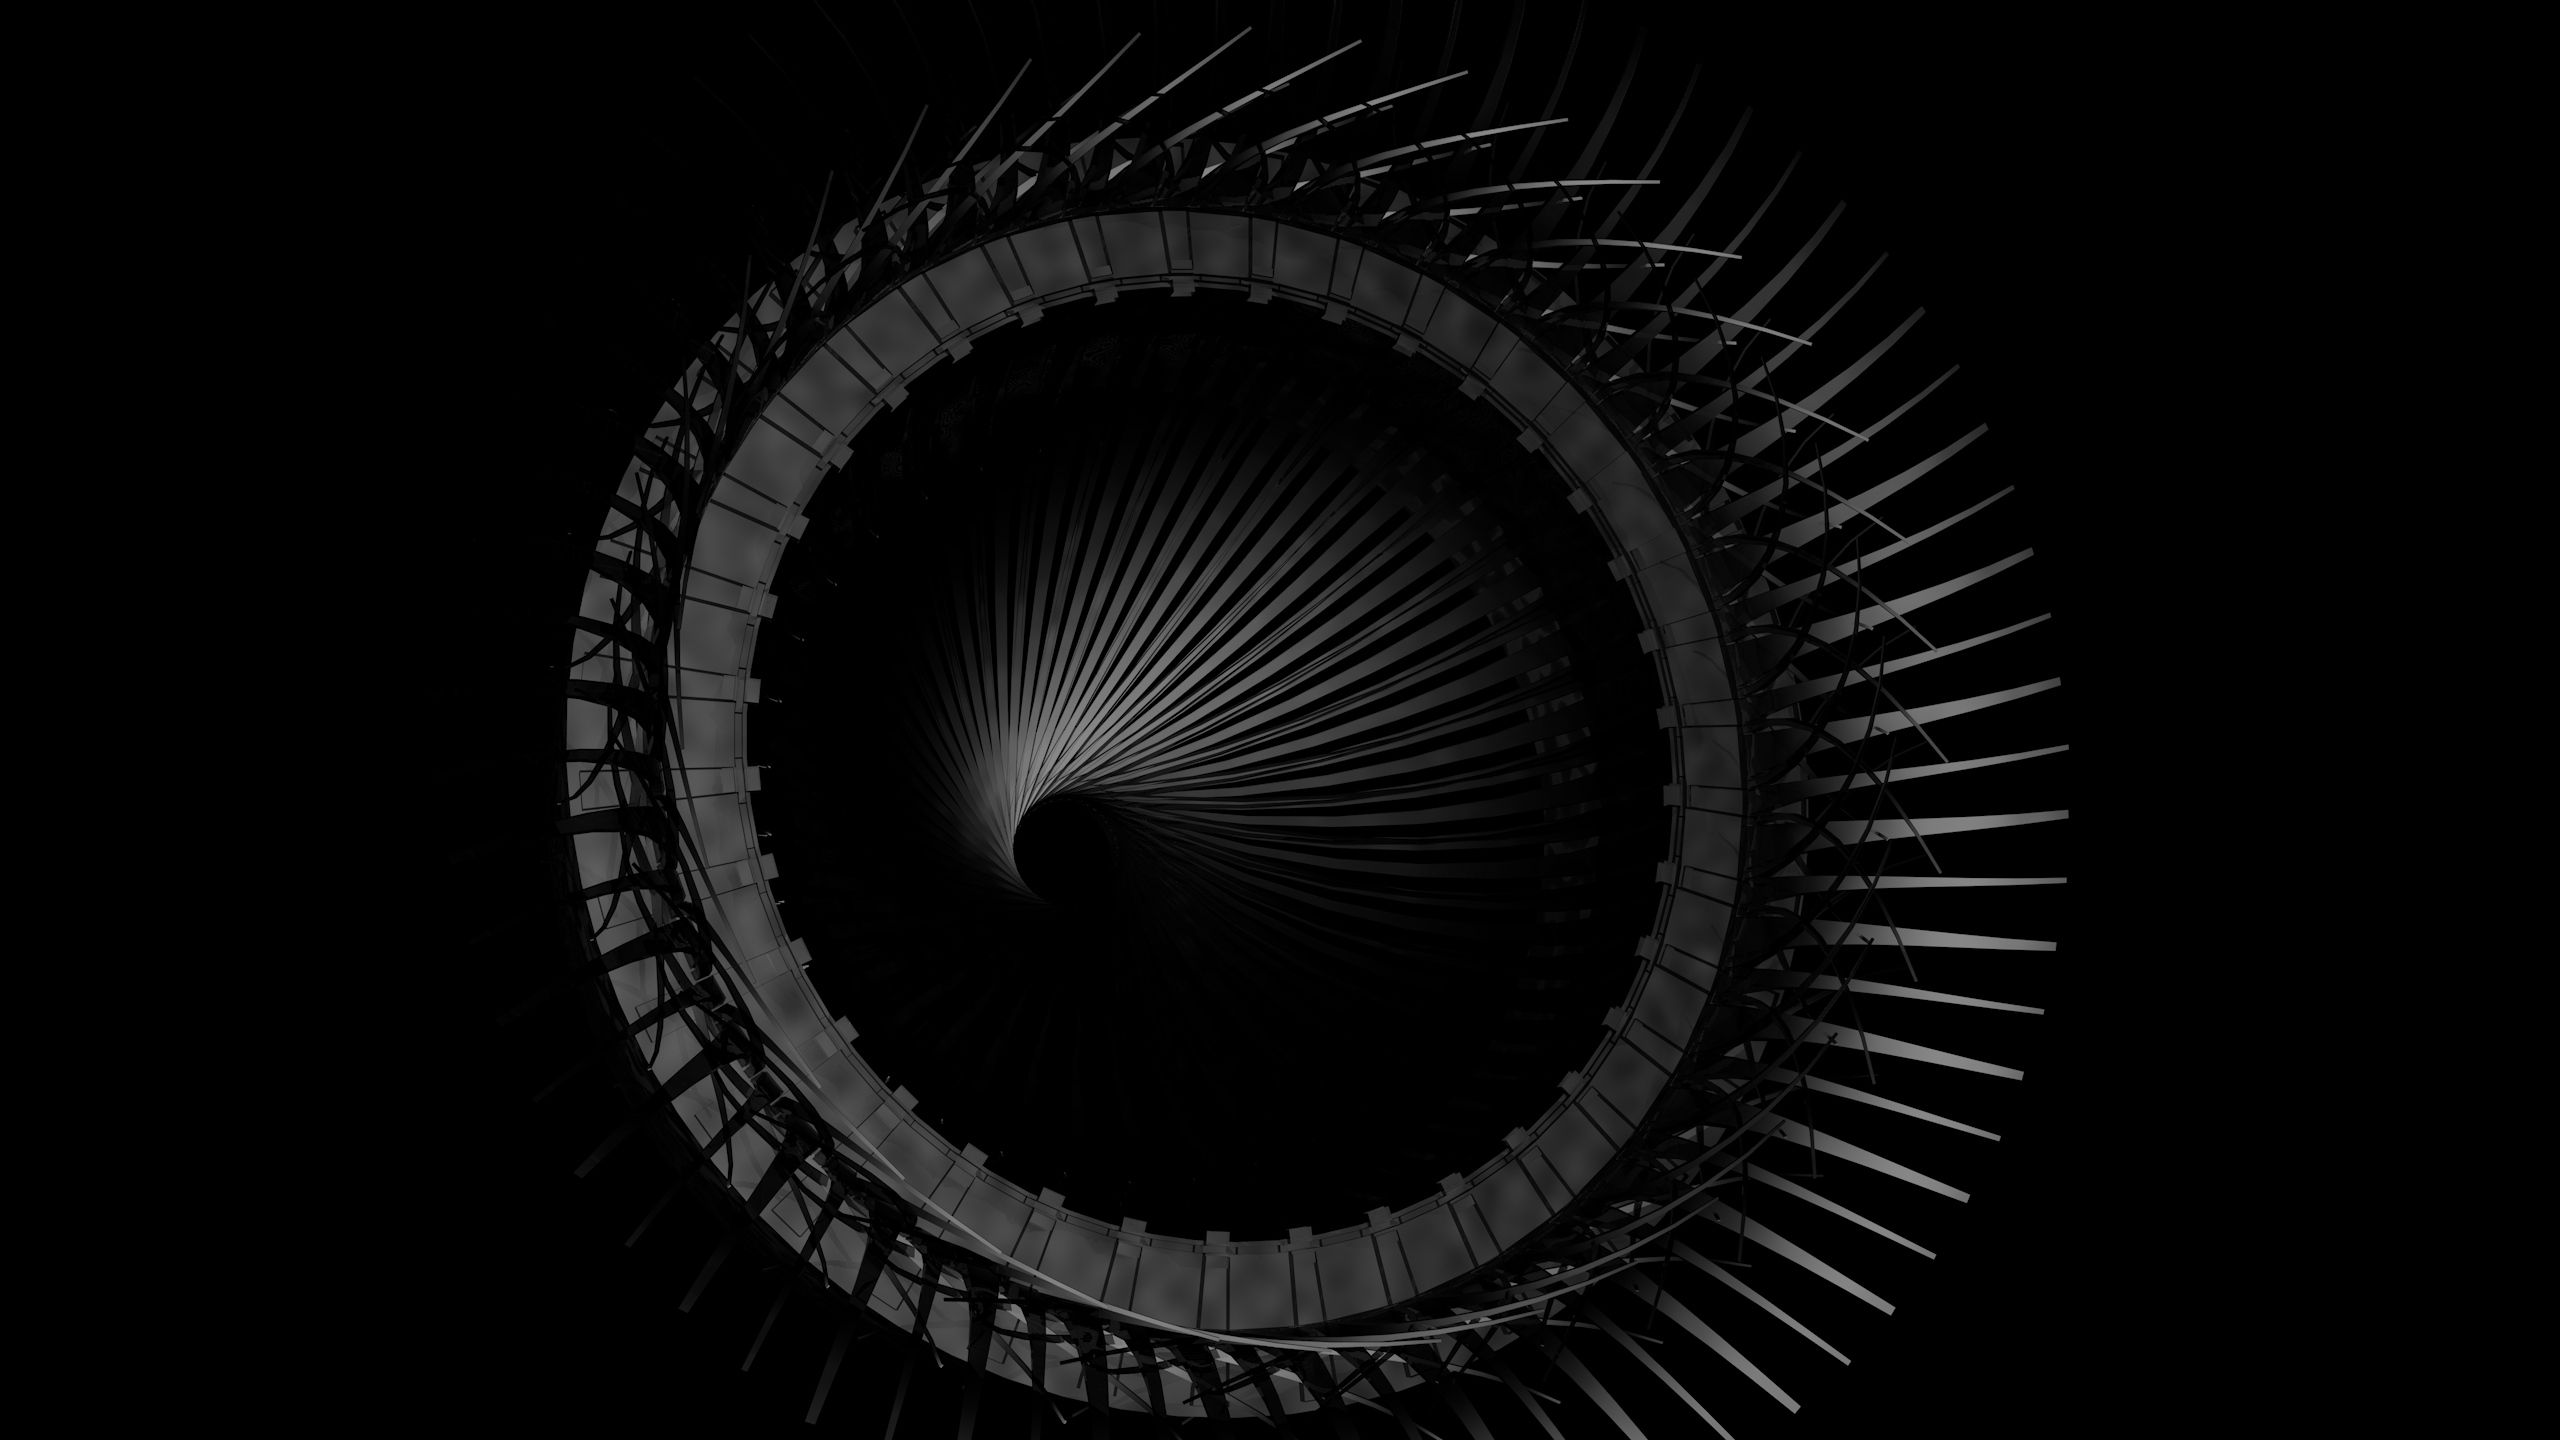 138105 Screensavers and Wallpapers Stairs for phone. Download black, rotation, stairs, ladder pictures for free